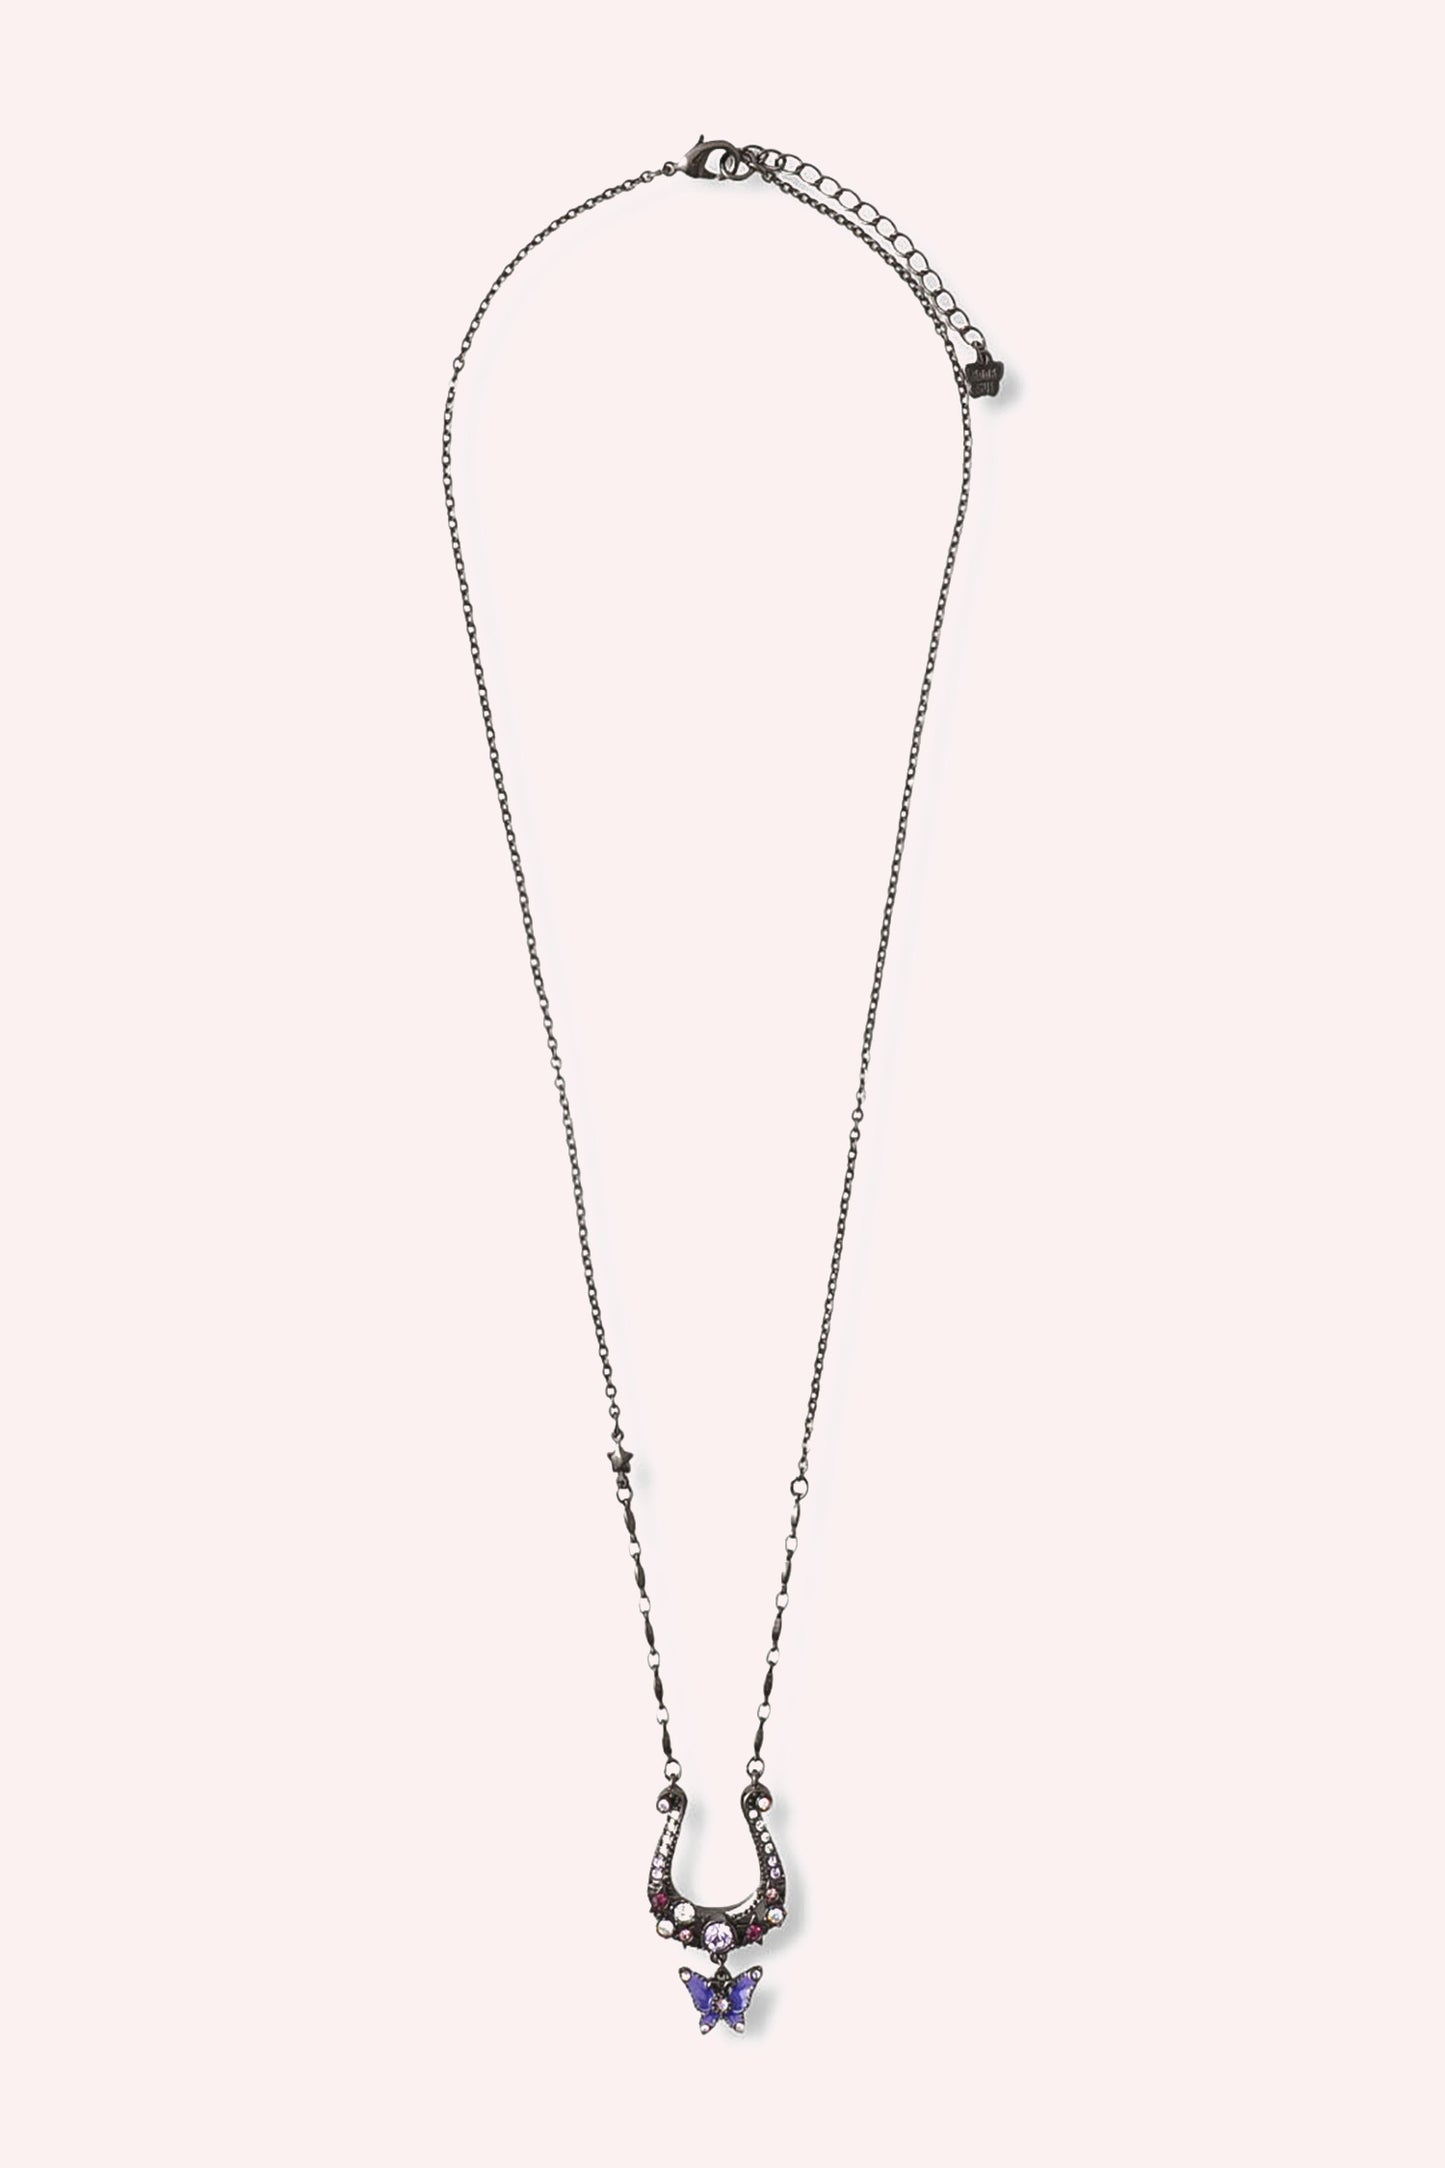 Gunmetal Necklace horseshoe with a butterfly underneath, chain Adorned with Star Charms 